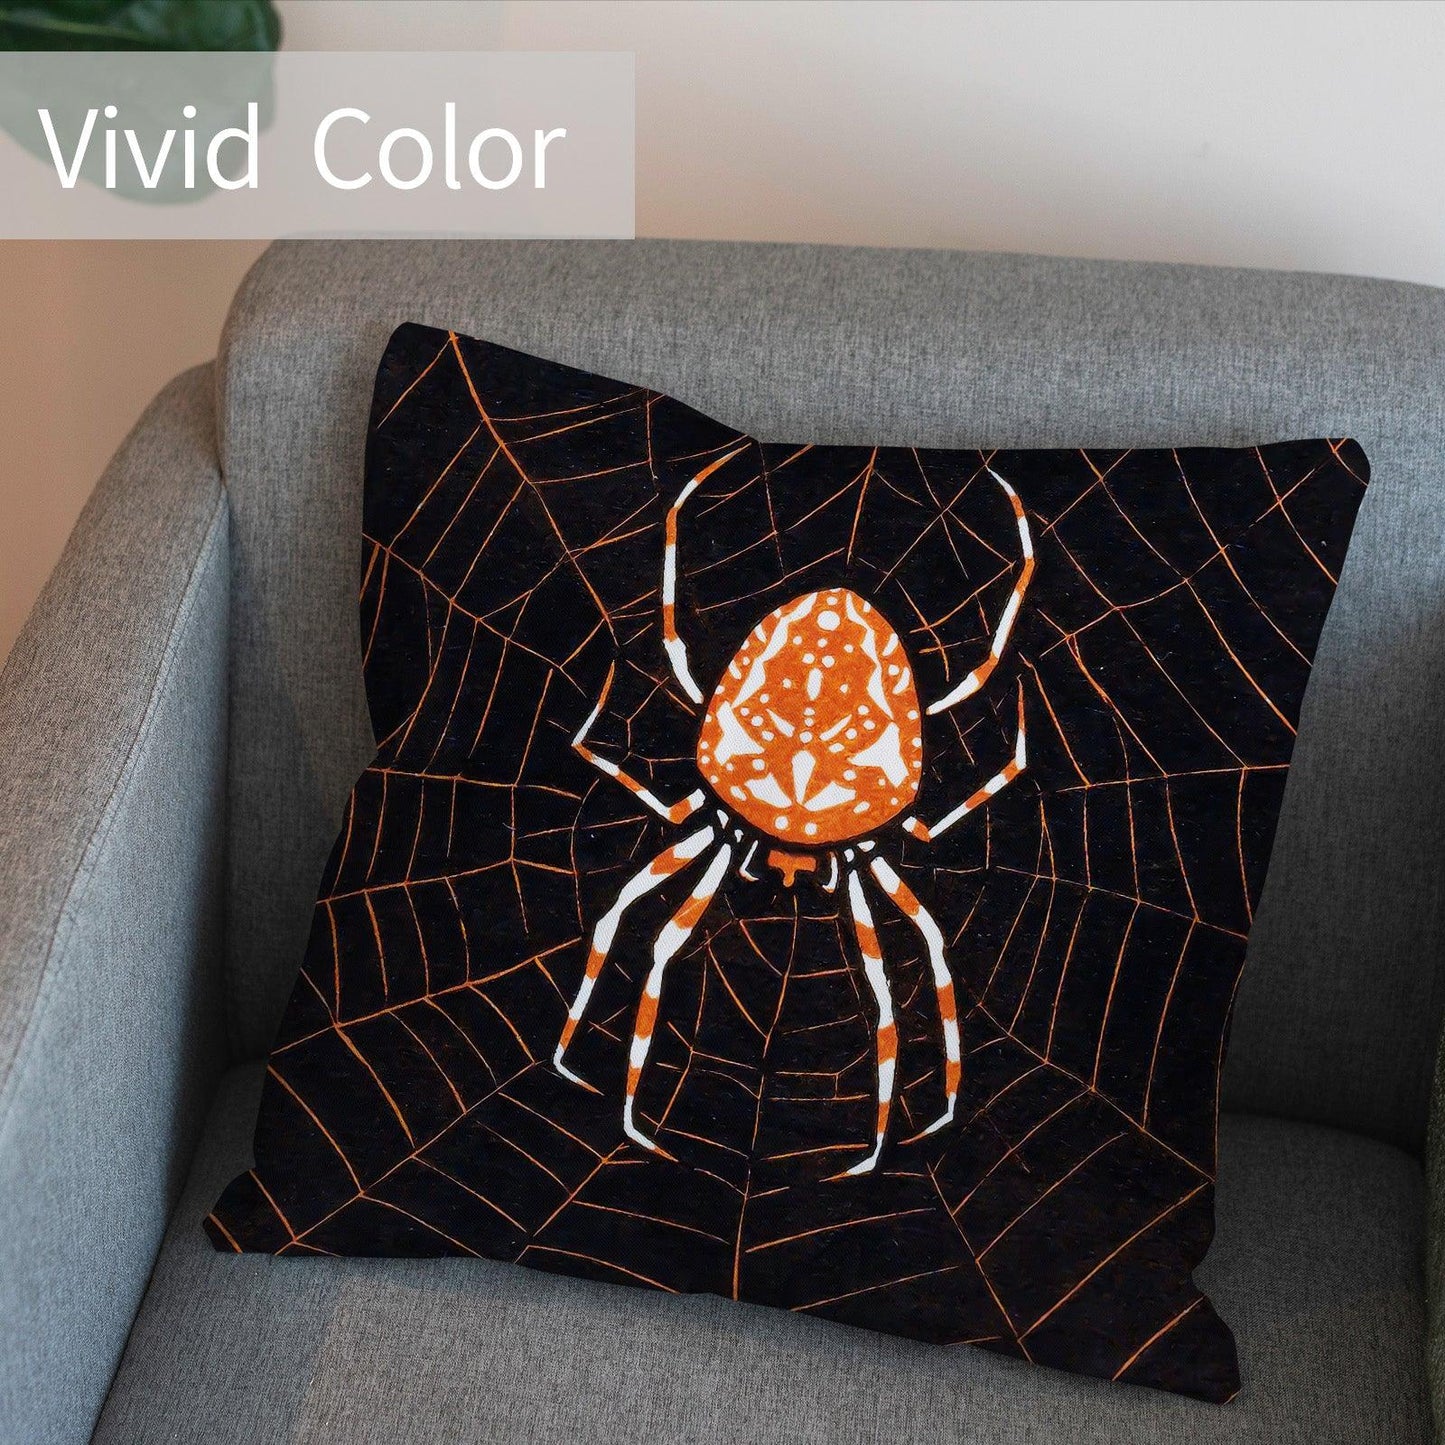 Art Animal Throw Pillow Covers Pack of 2 18x18 Inch (Spider in A Web by Julie de Graag) - Berkin Arts